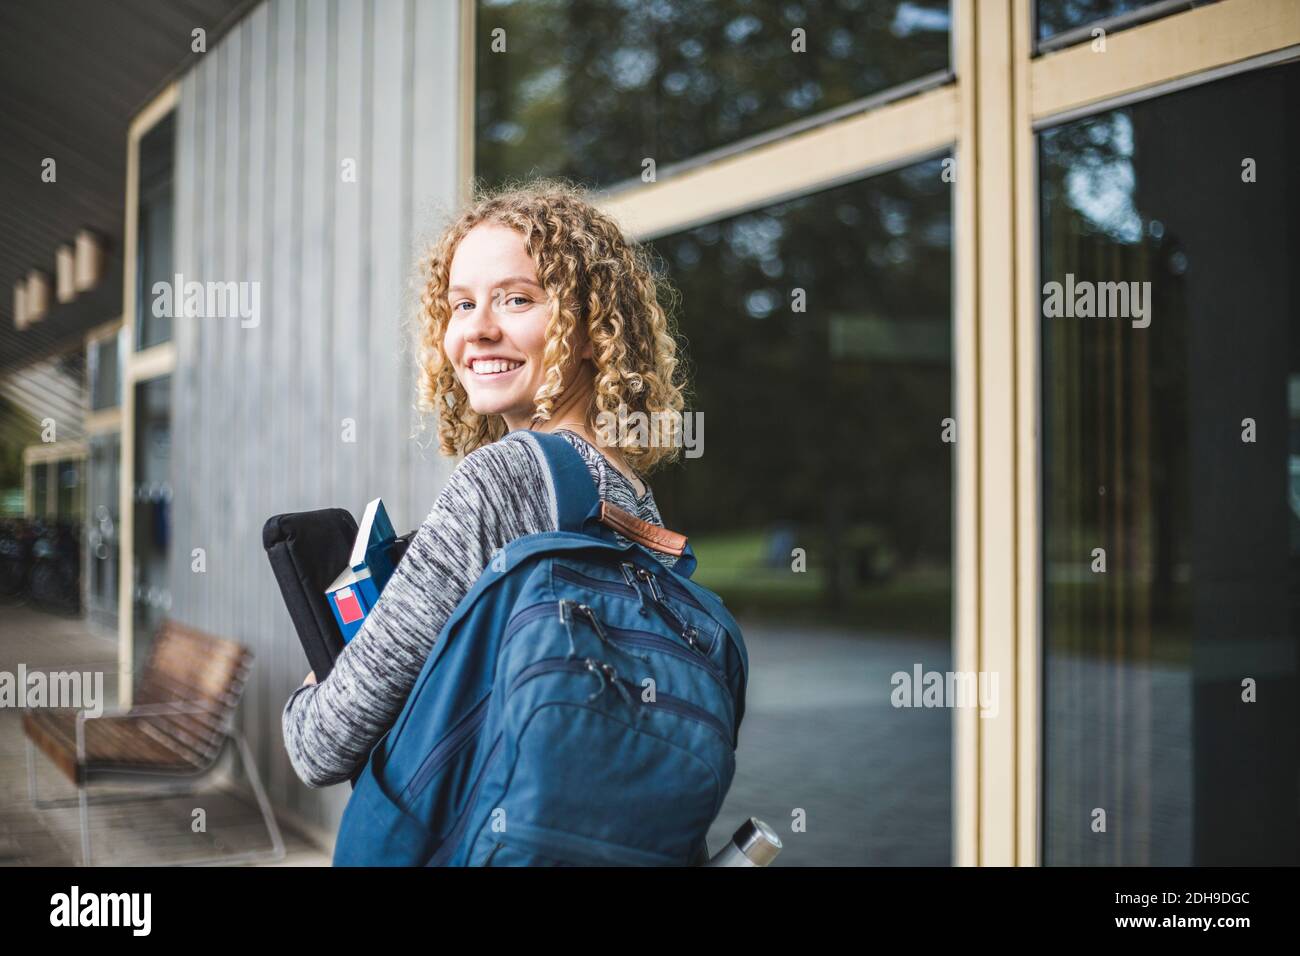 Portrait of smiling young woman with bag at university campus Stock Photo